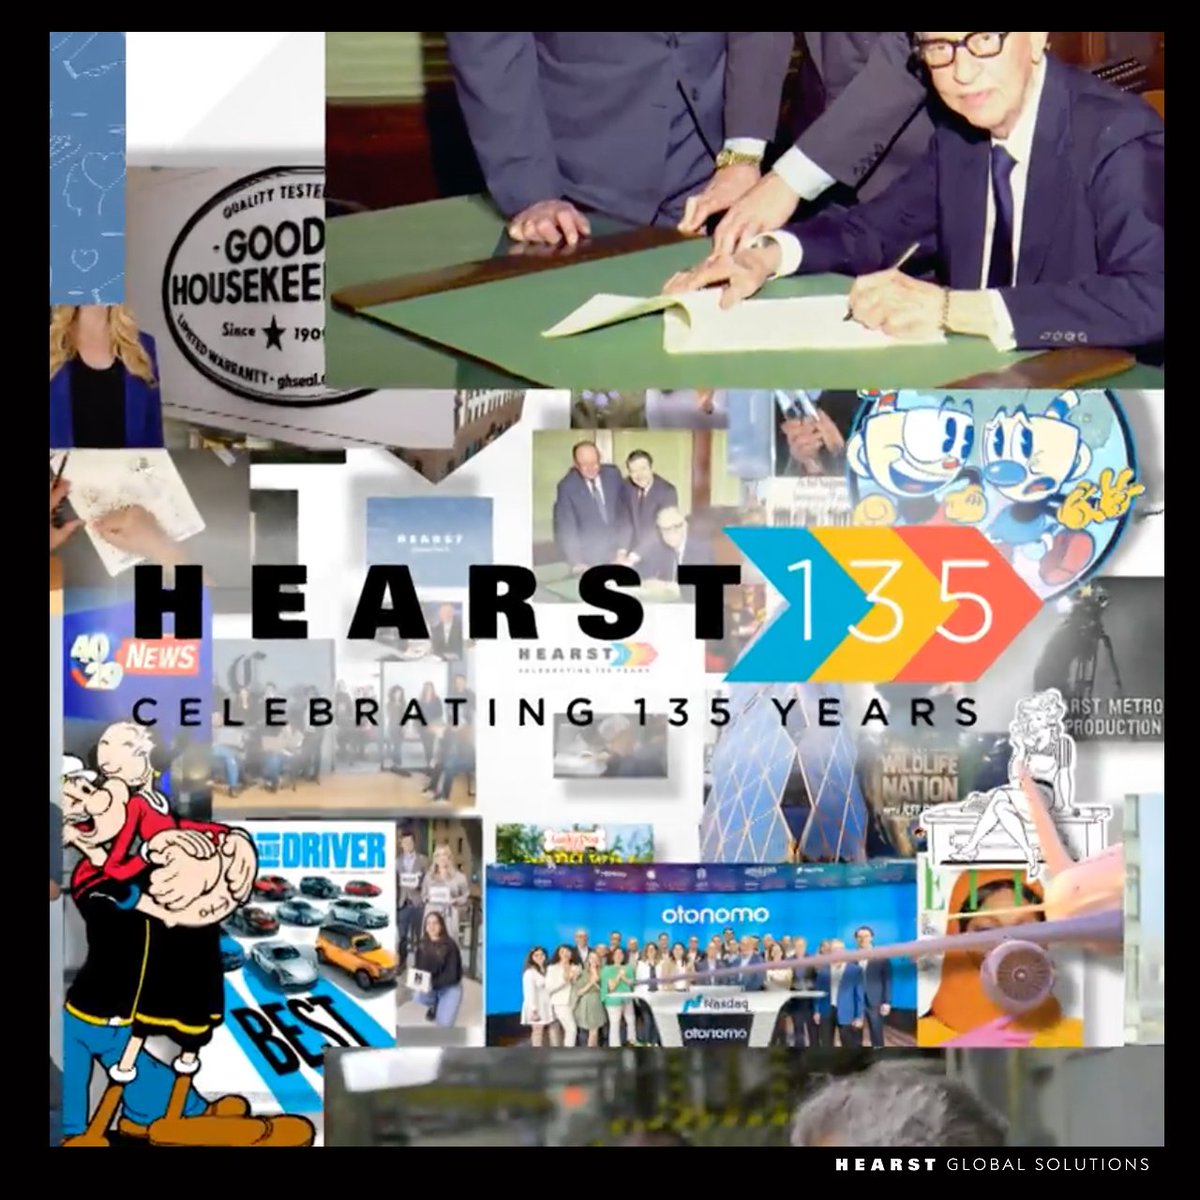 At Hearst, we are always moving forward. 135 years in business, generations of Hearst colleagues and a culture of innovation, storytelling and service to our communities create countless milestone moments. bit.ly/3yaJsNx

#positivelyhearst #hearstglobalsolutions